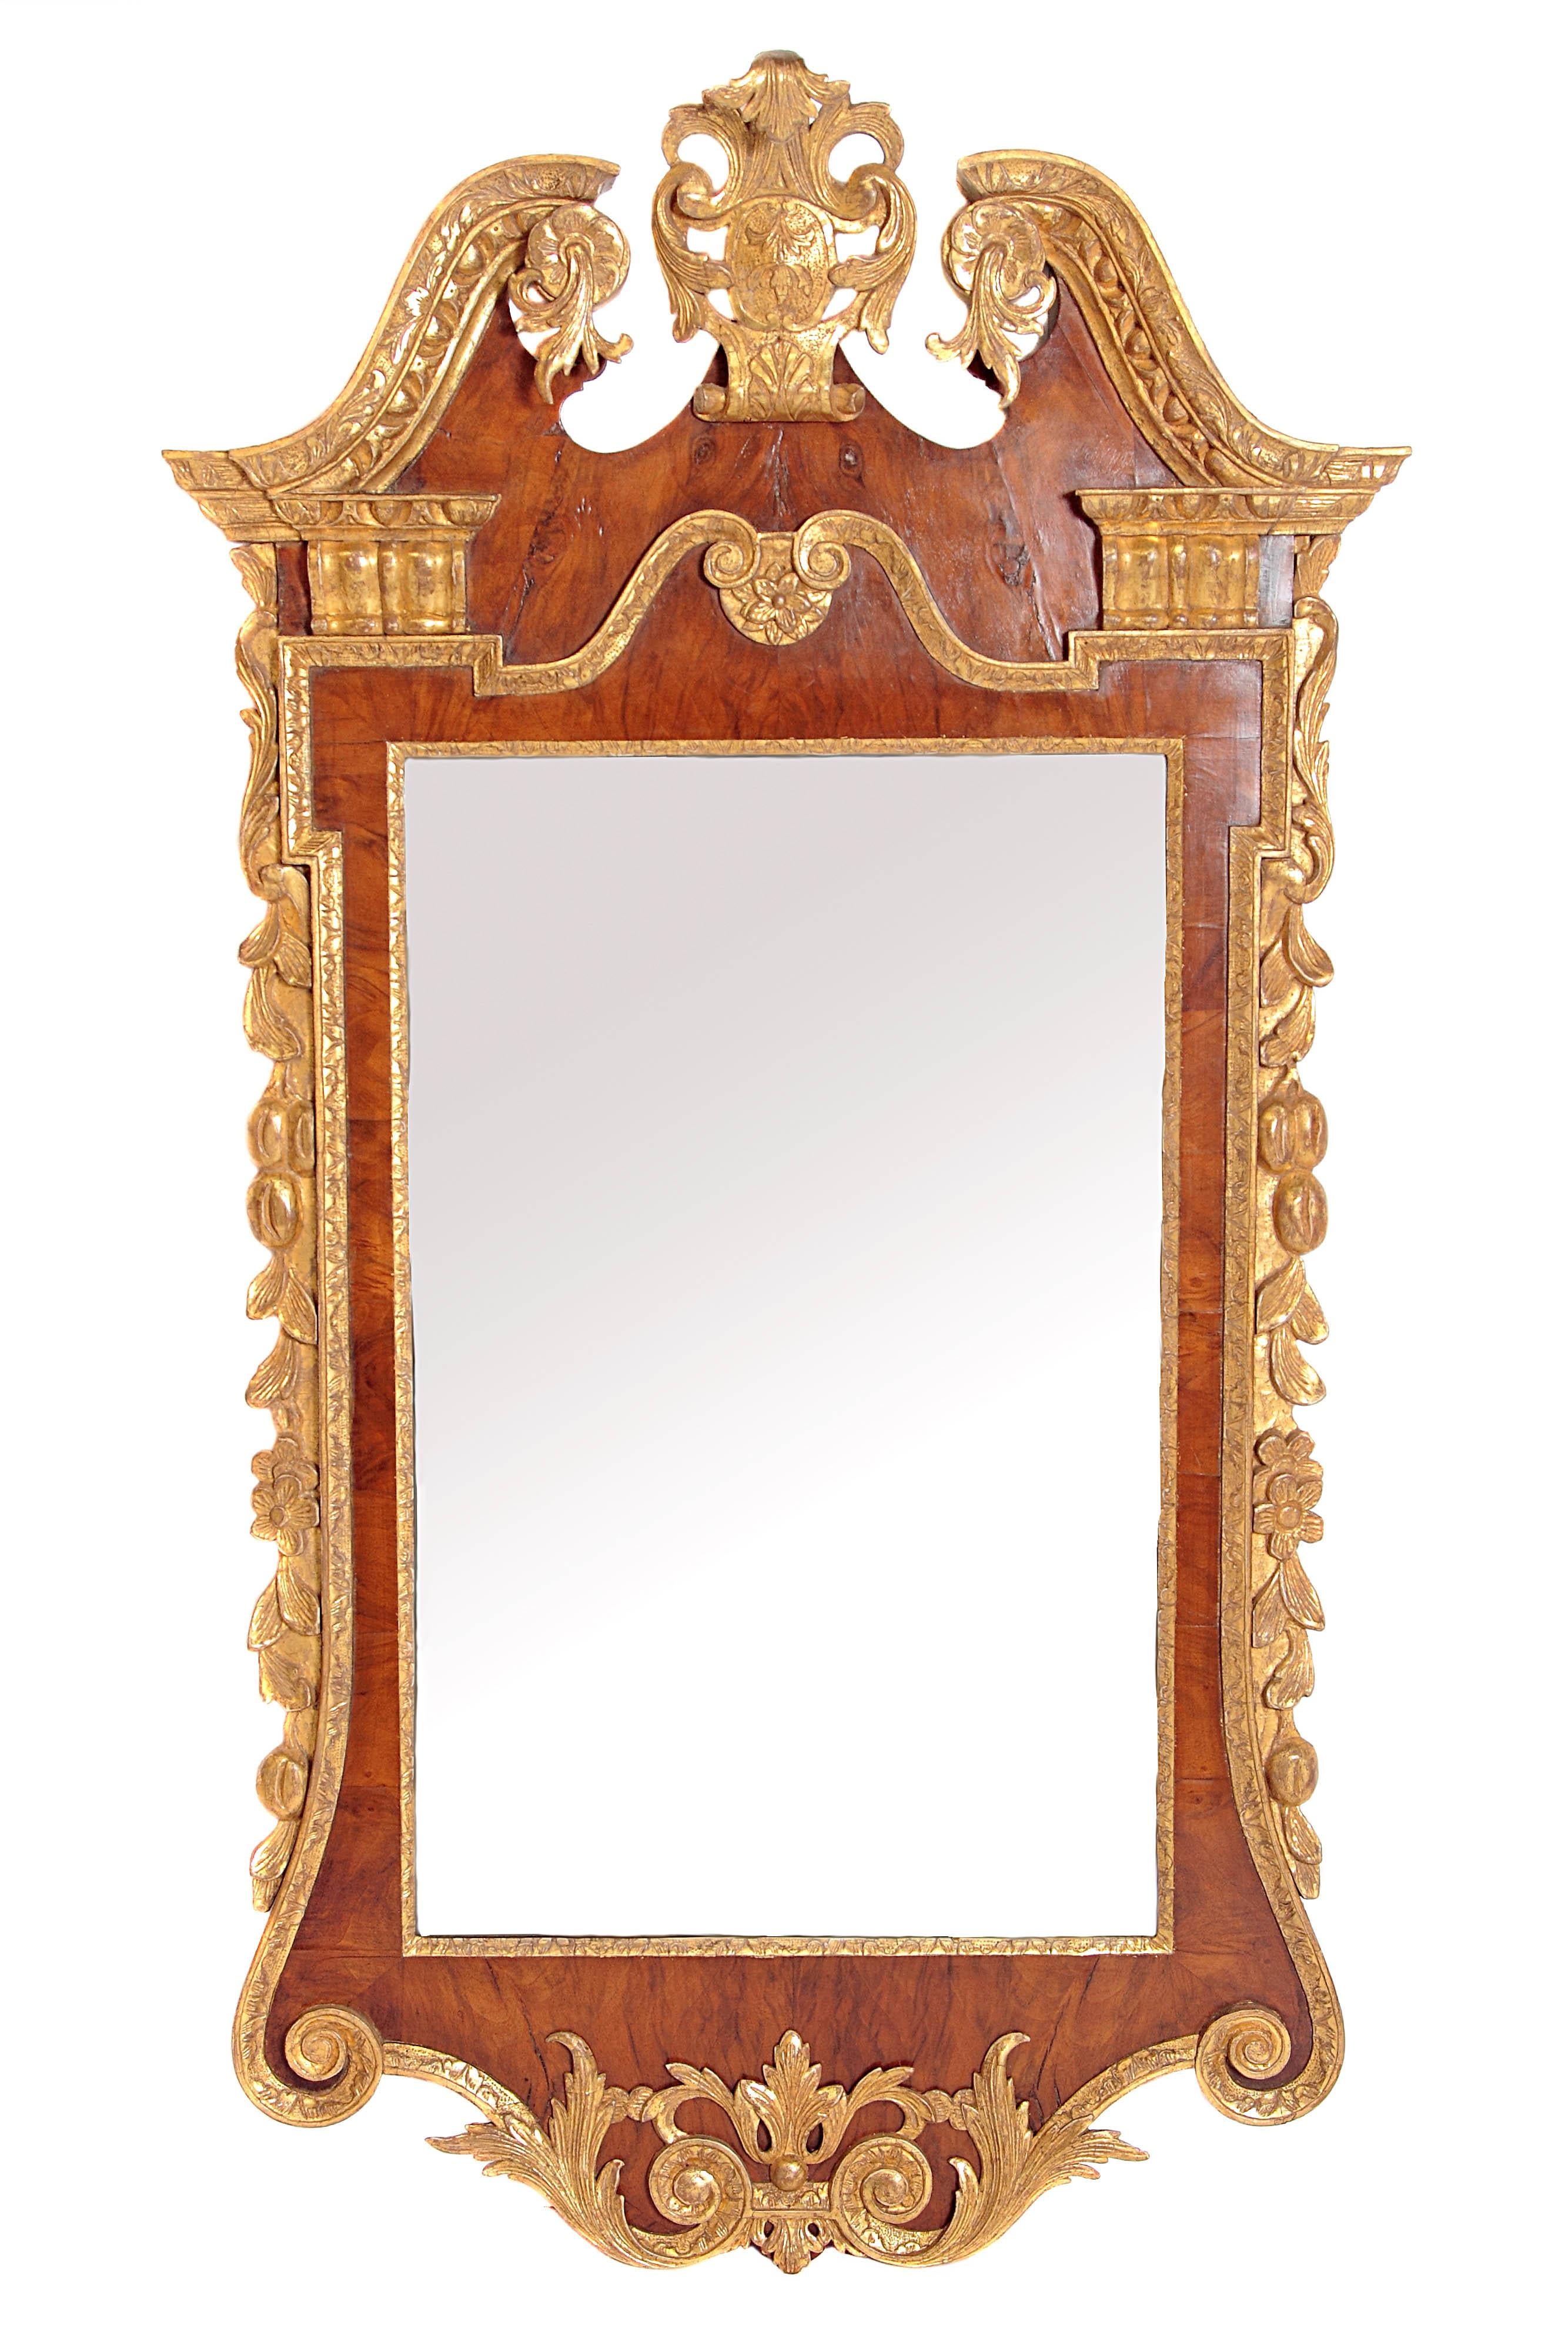 Period George II Pier Glass with Bookmatched Walnut Veneers 4